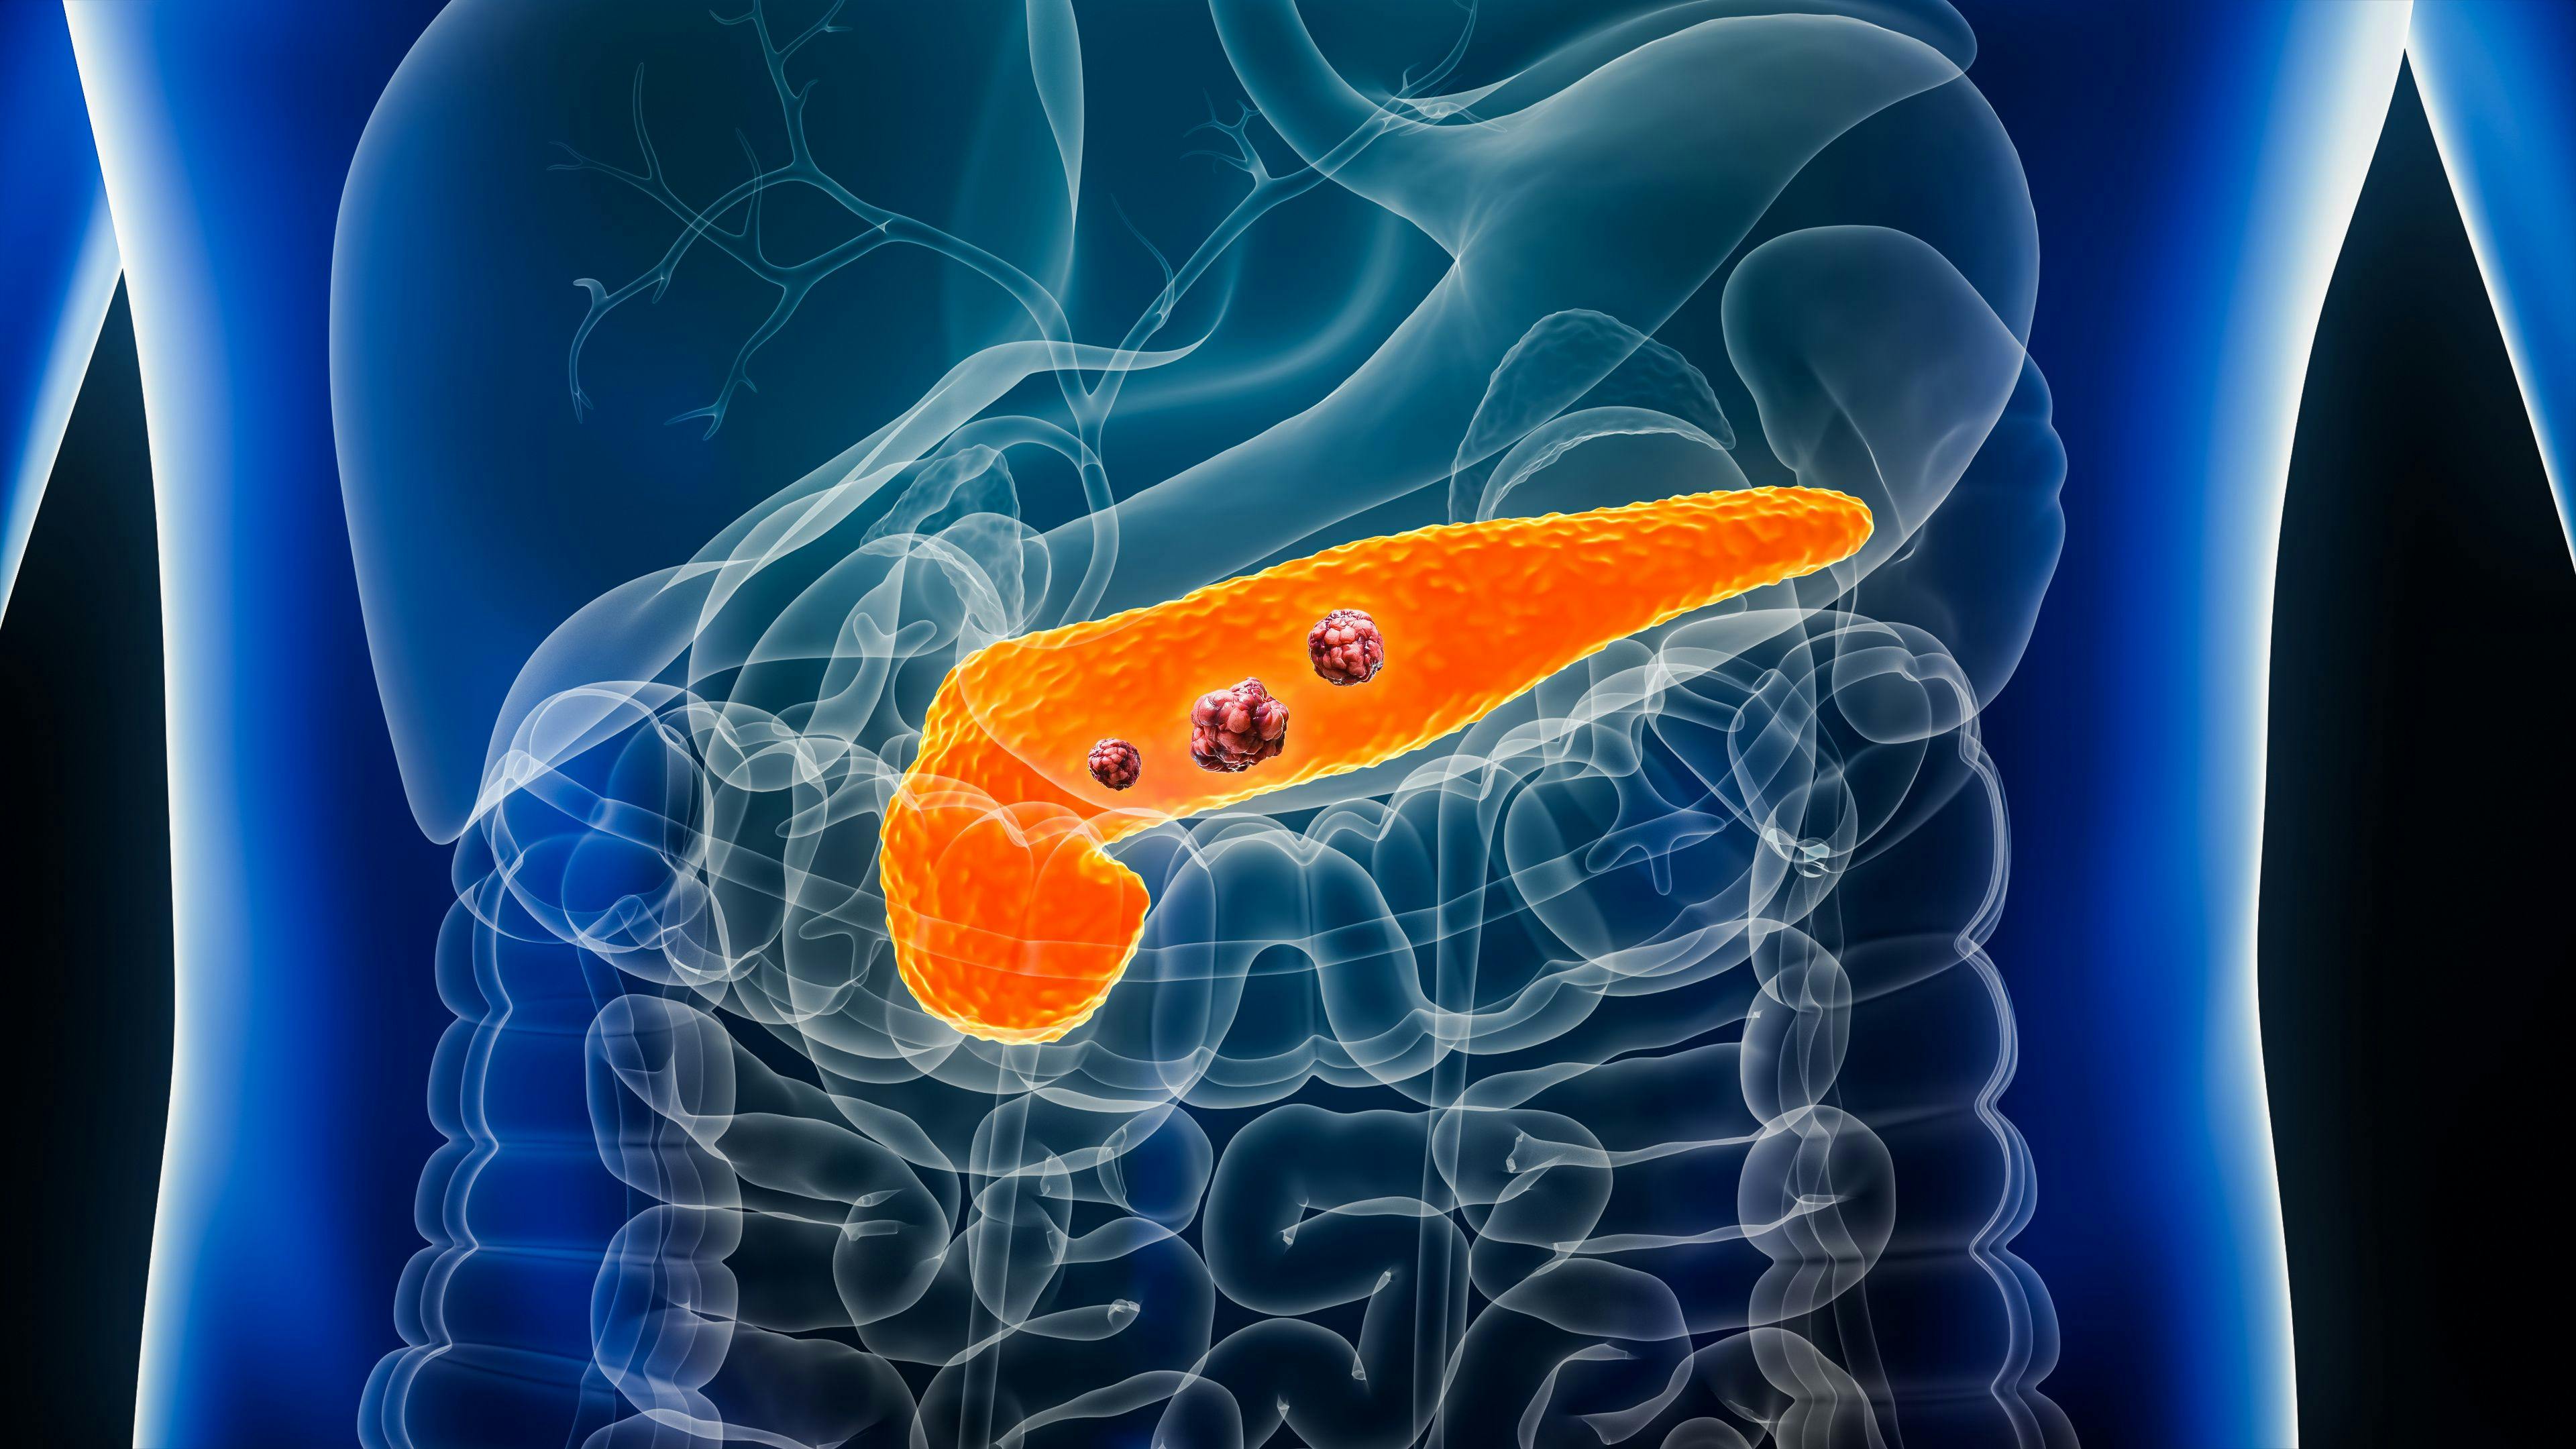 Pancreas or pancreatic cancer with organs and tumors or cancerous cells 3D rendering illustration with male body. Anatomy, oncology, disease, medical, biology, science, healthcare concepts- Image credit: Matthieu | stock.adobe.com